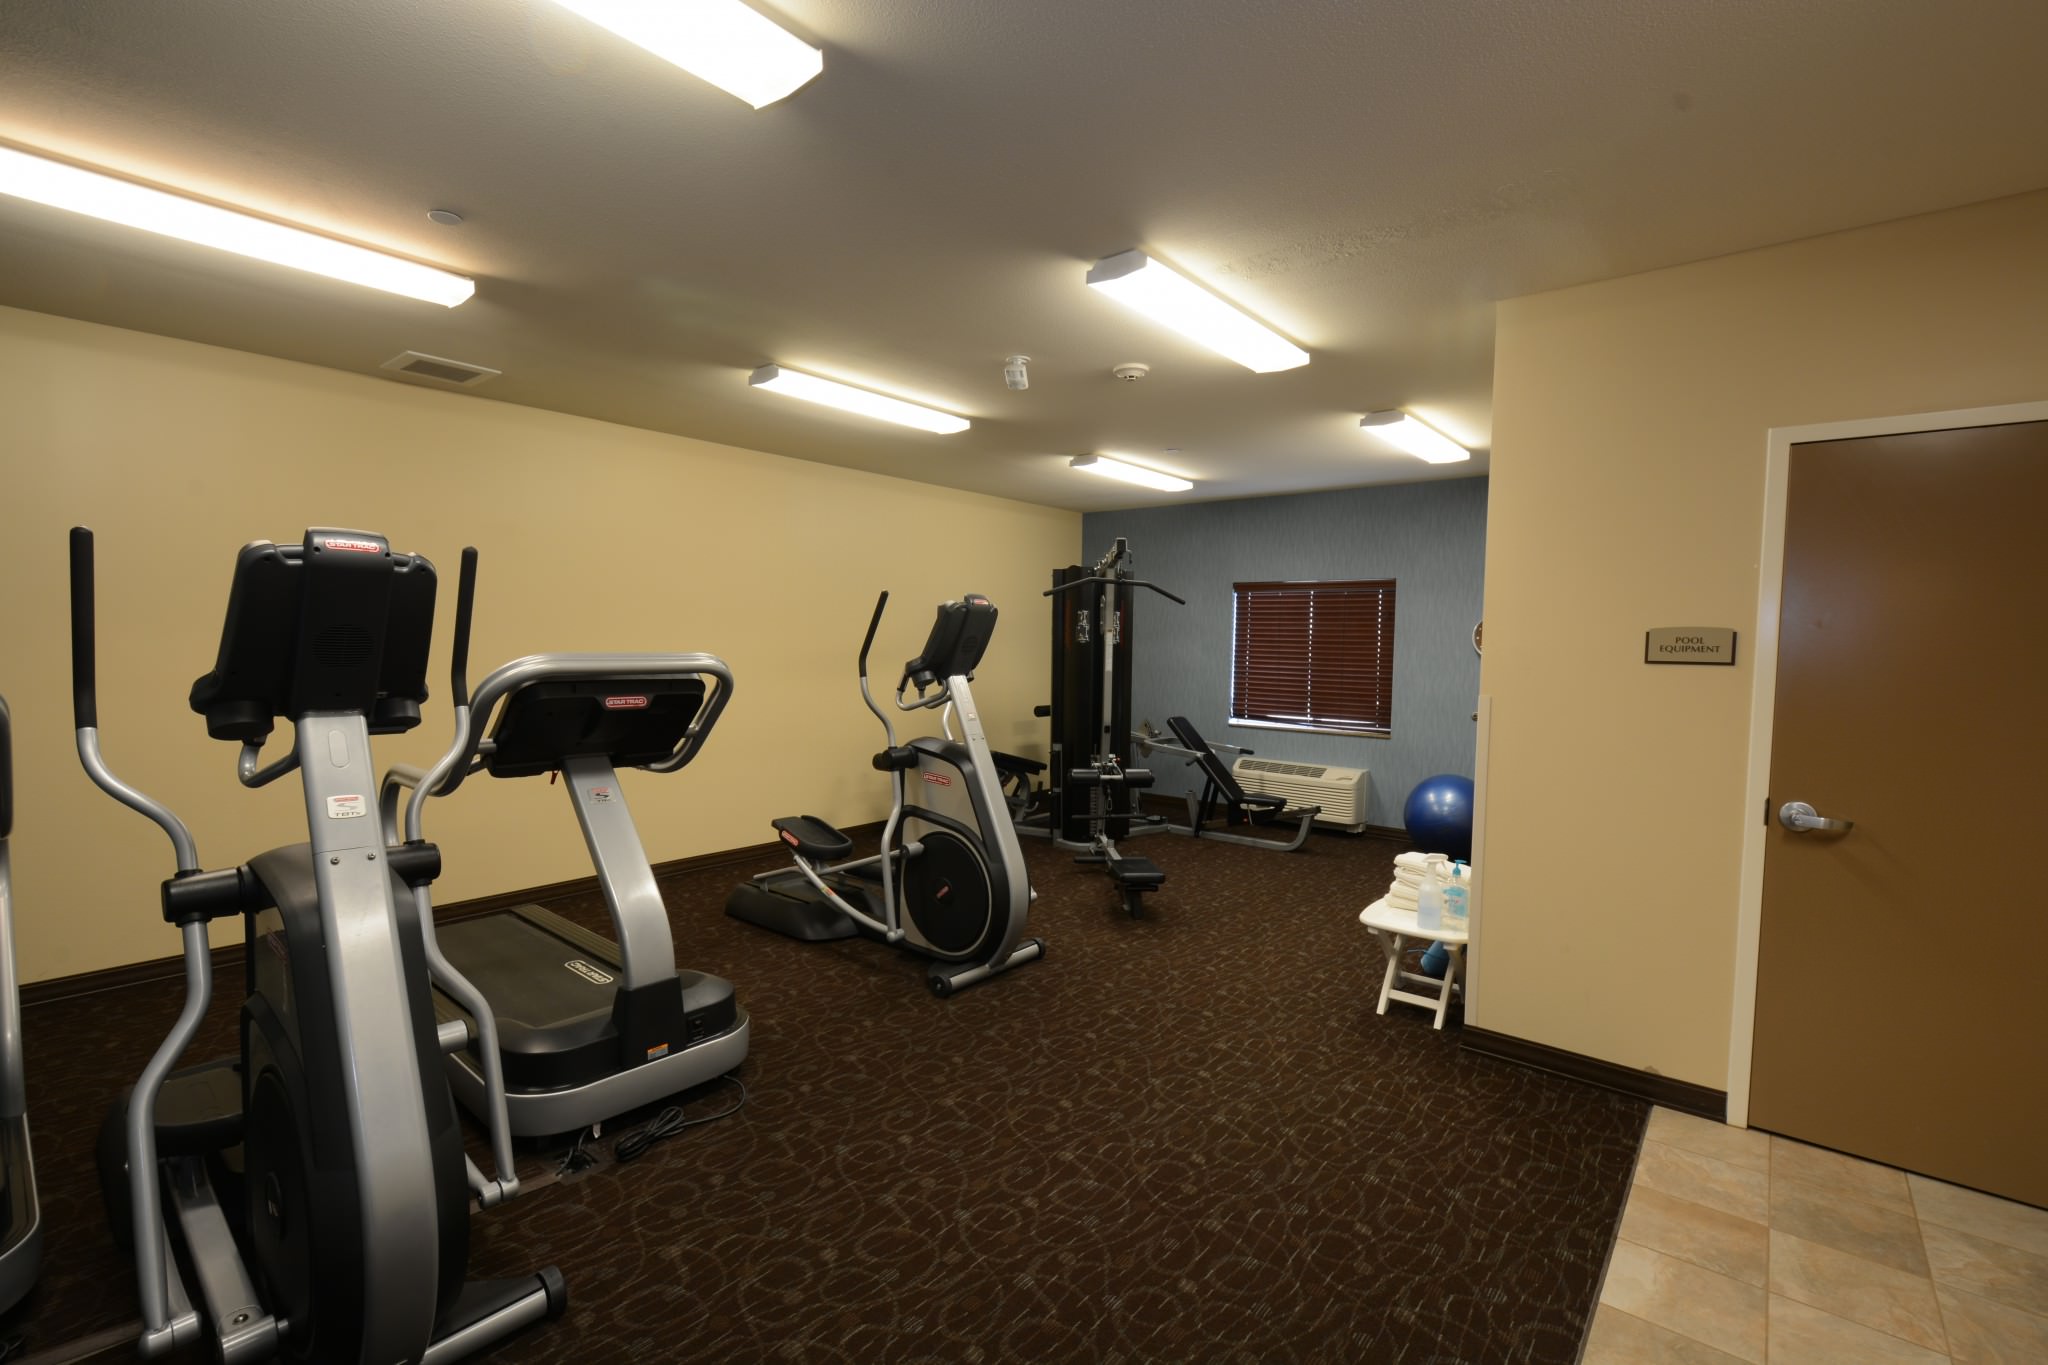 HomStay exercise room